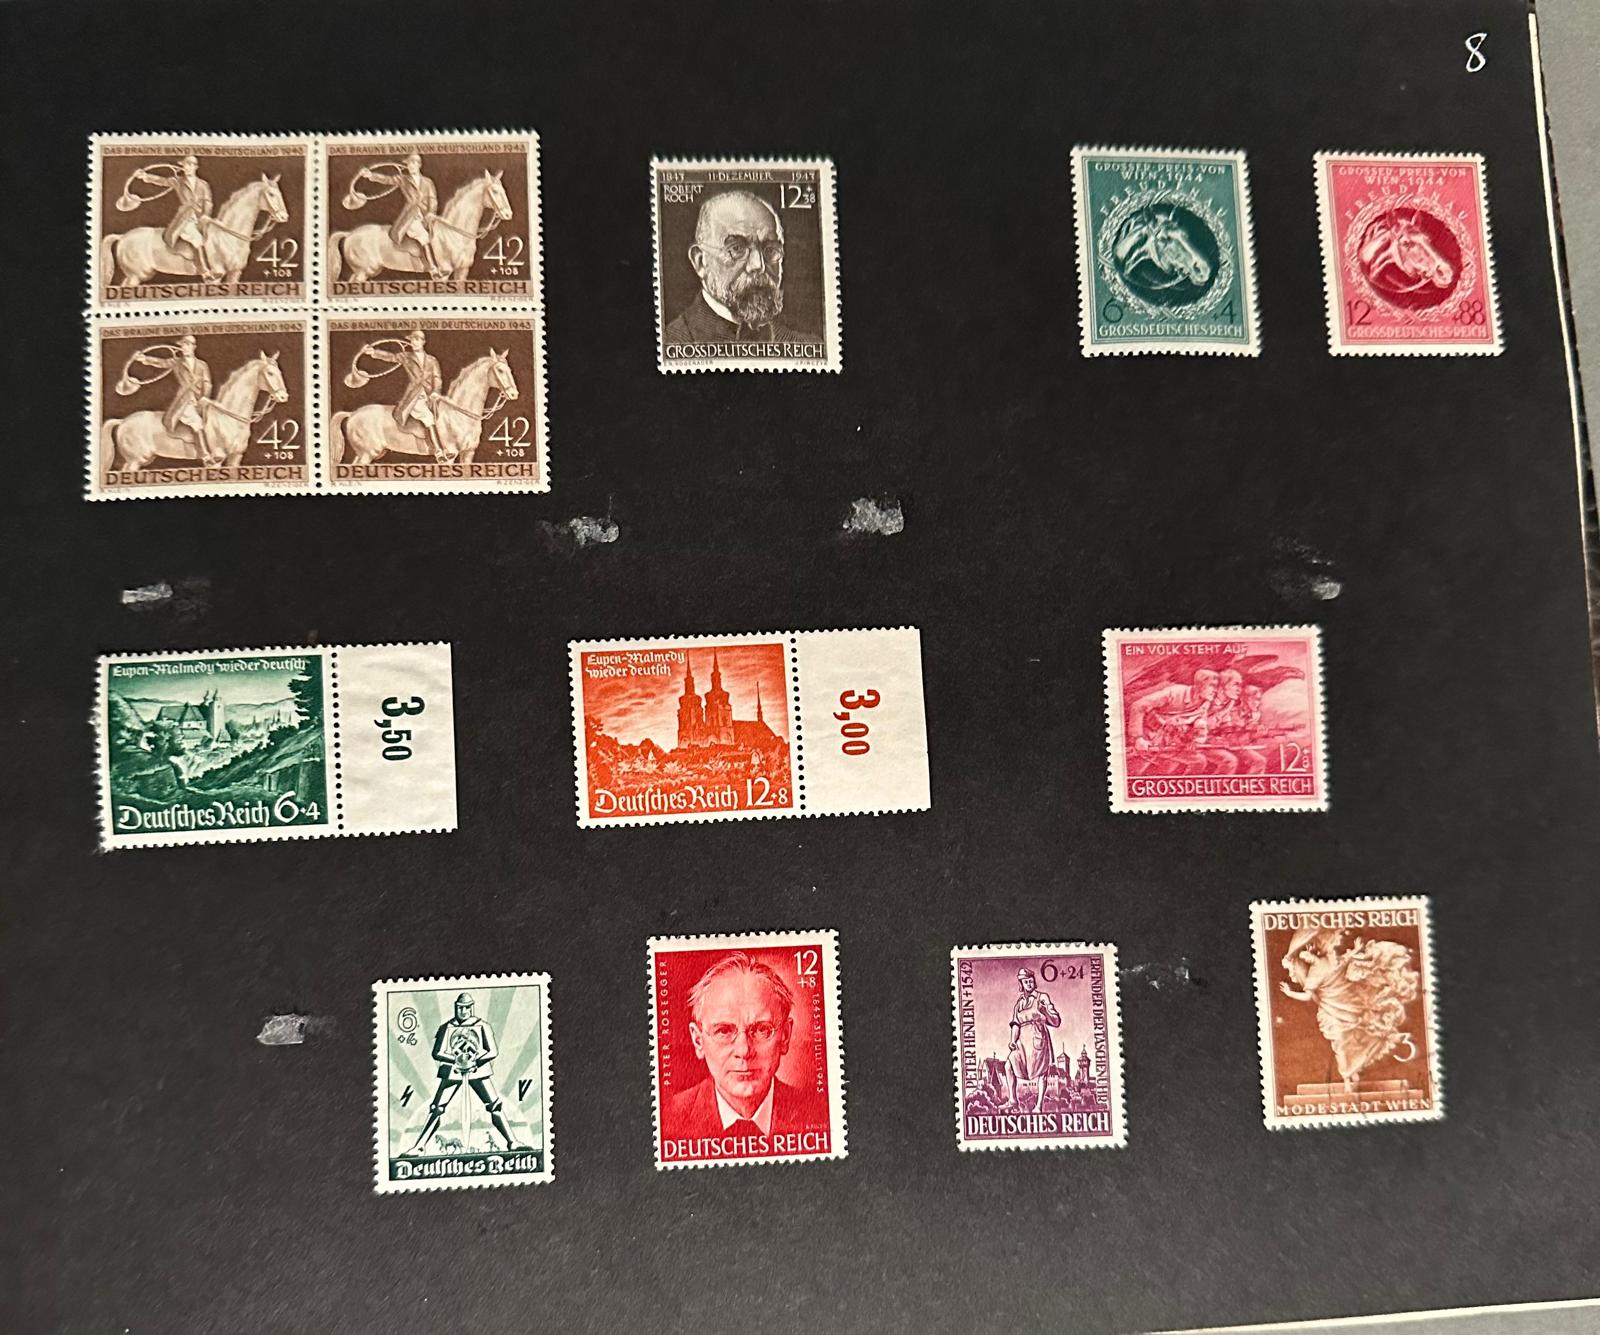 A WWII era German stamp album with a range of various stamps, denominations and issues. - Image 3 of 11